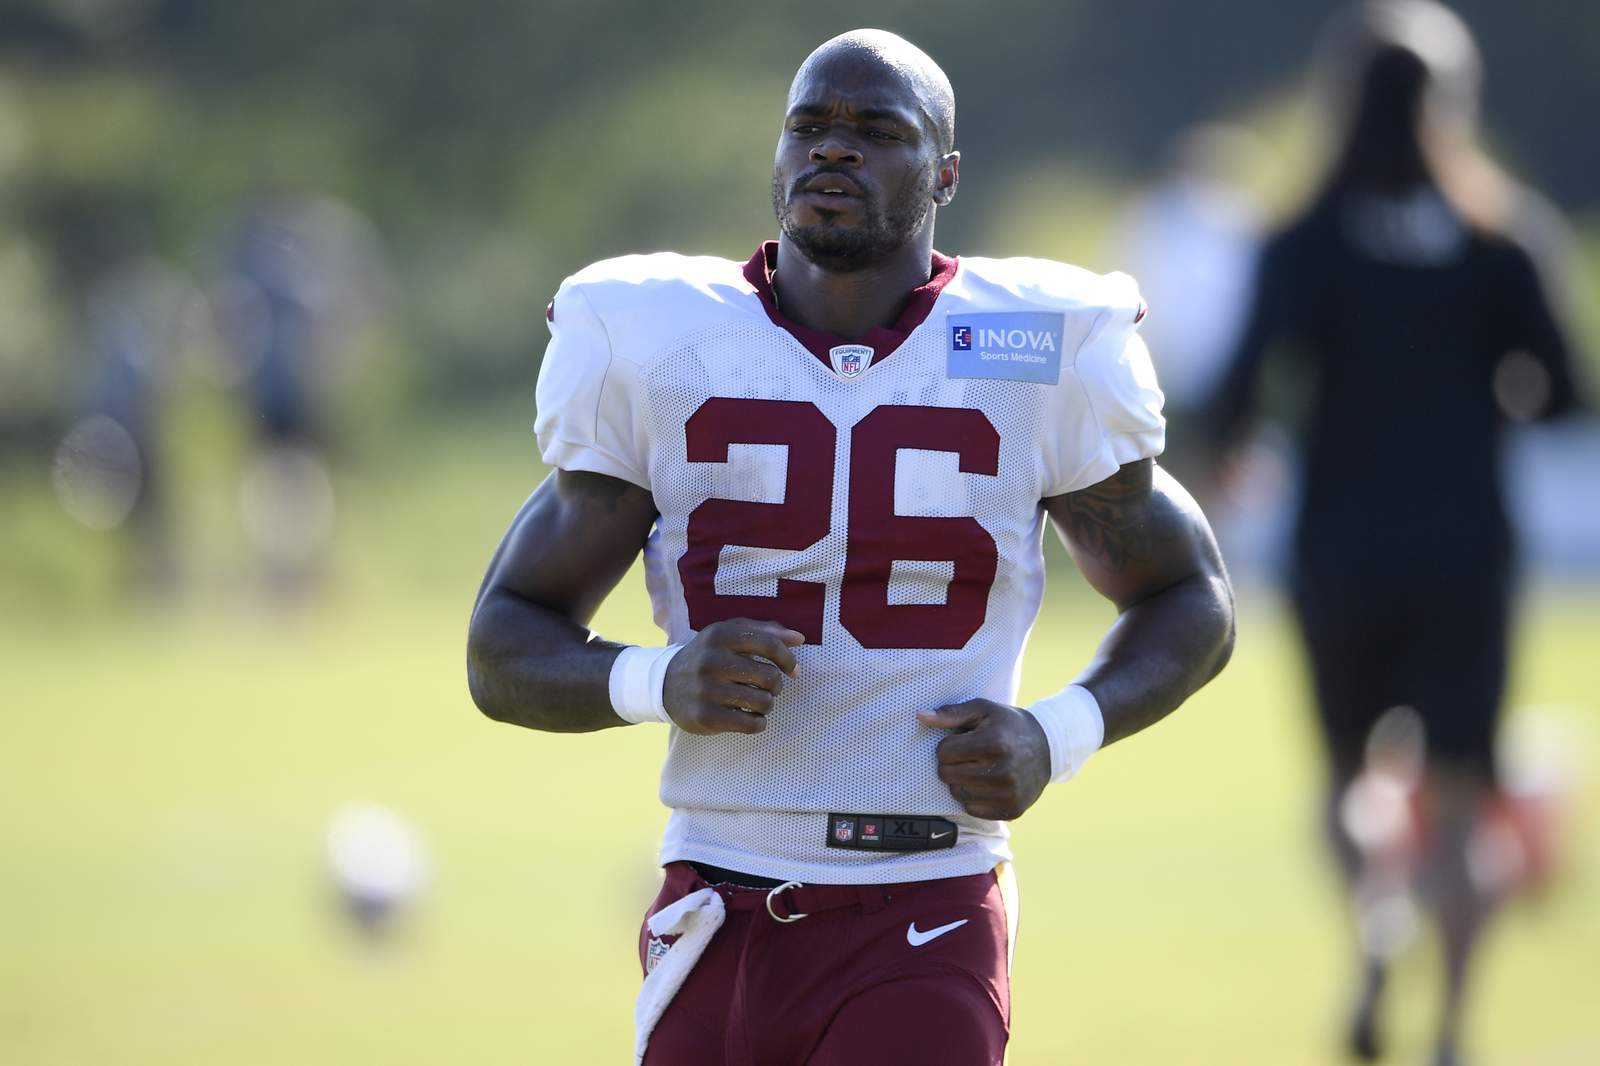 Washington releases Adrian Peterson, turns to young backs